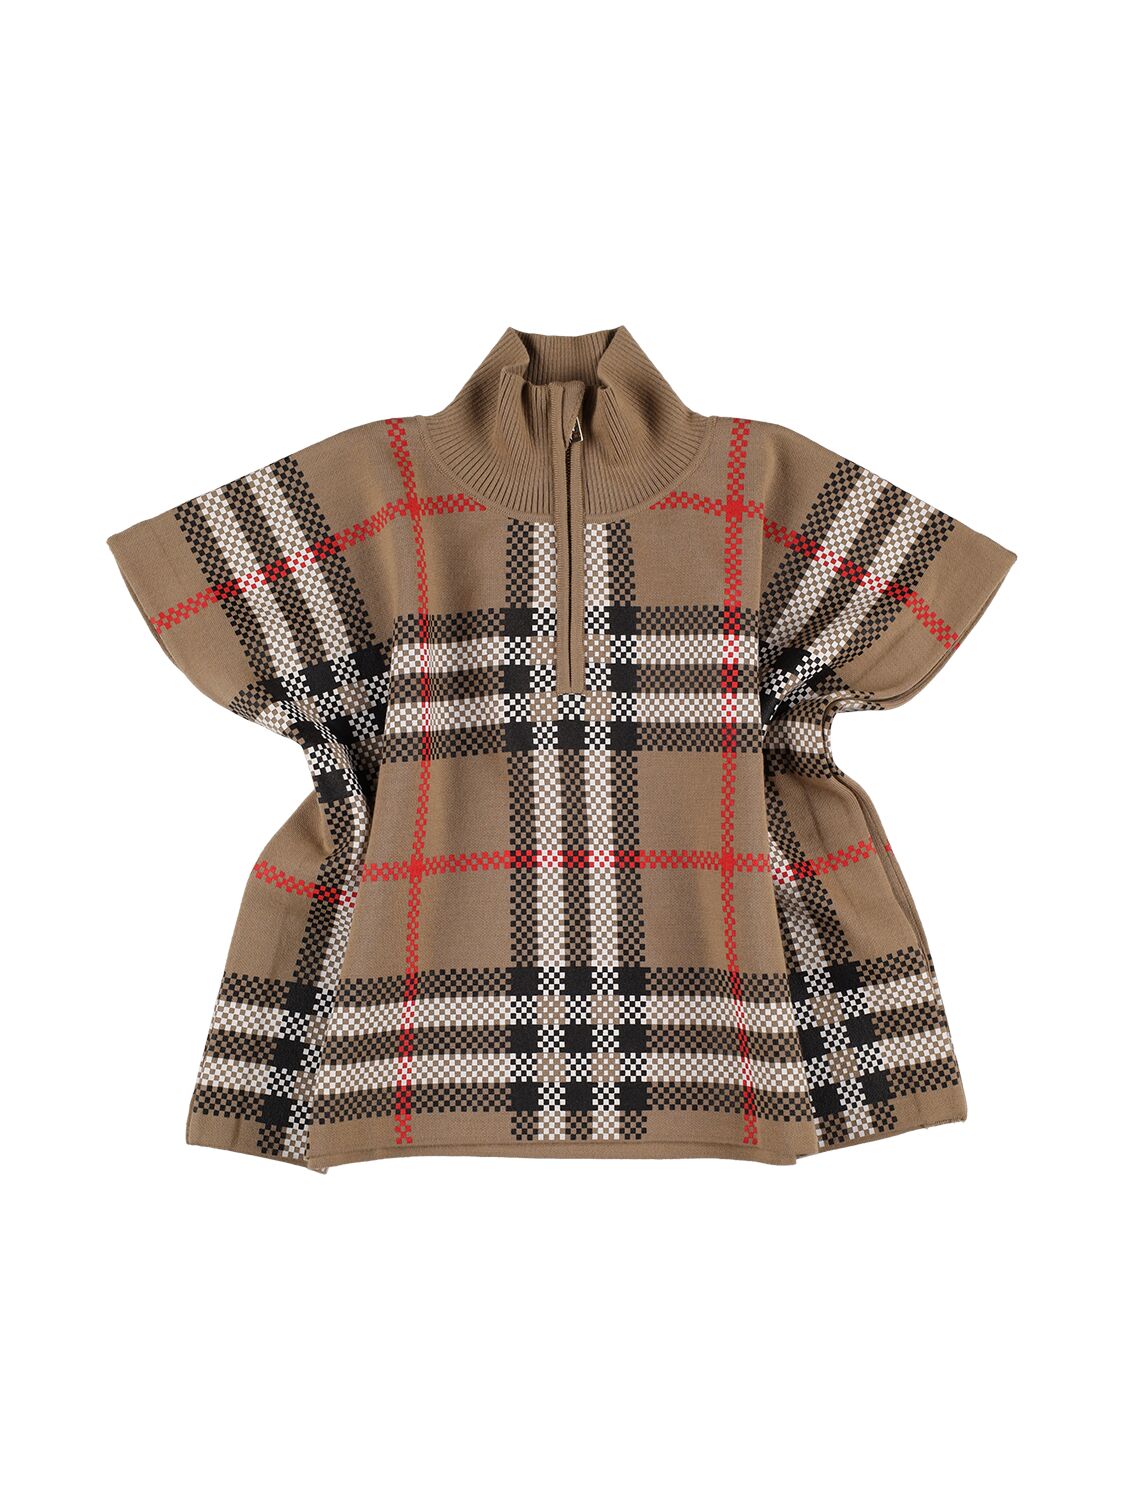 Image of Check Print Wool Knit Cape